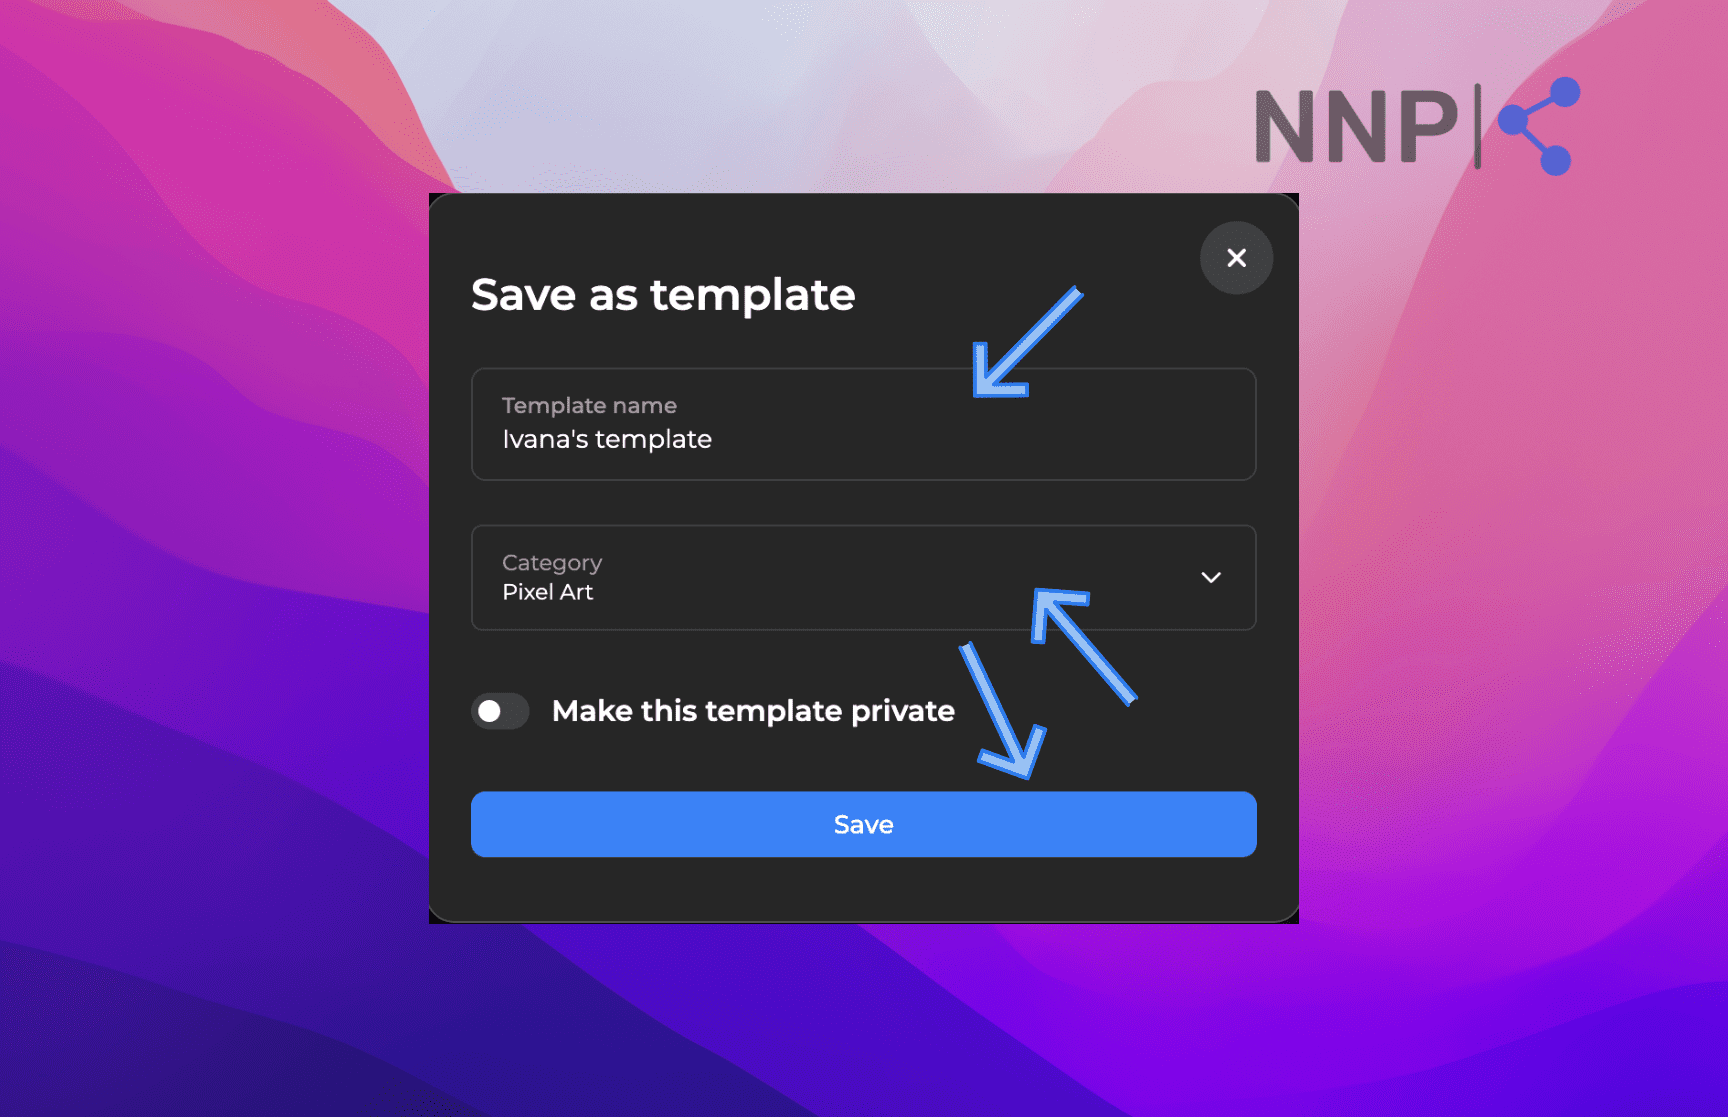 Enter a template name and select the category and click on ‘Save’ at the bottom.